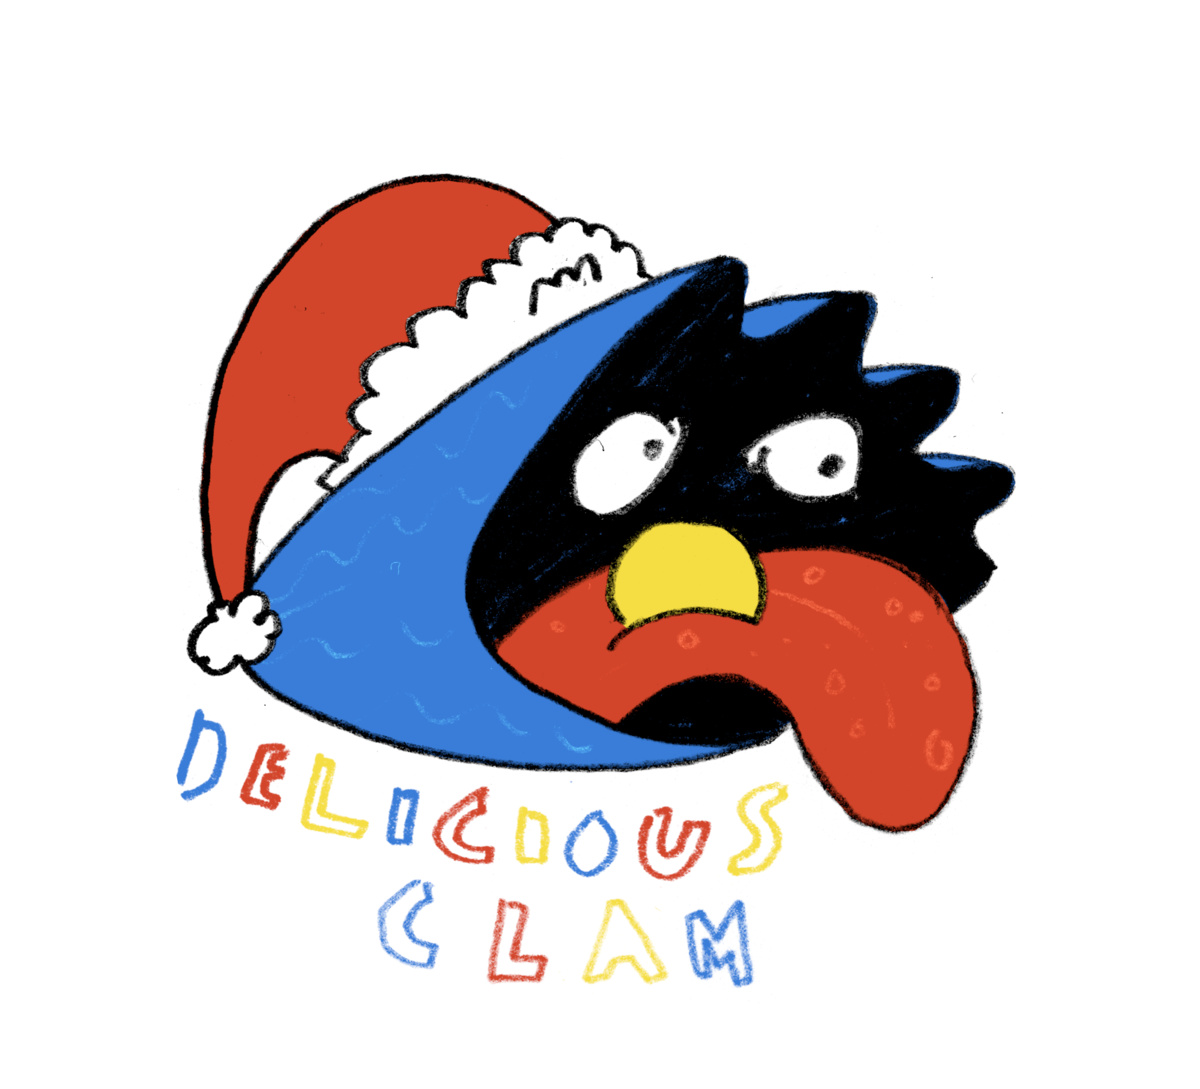 Delicious Clam Christmas